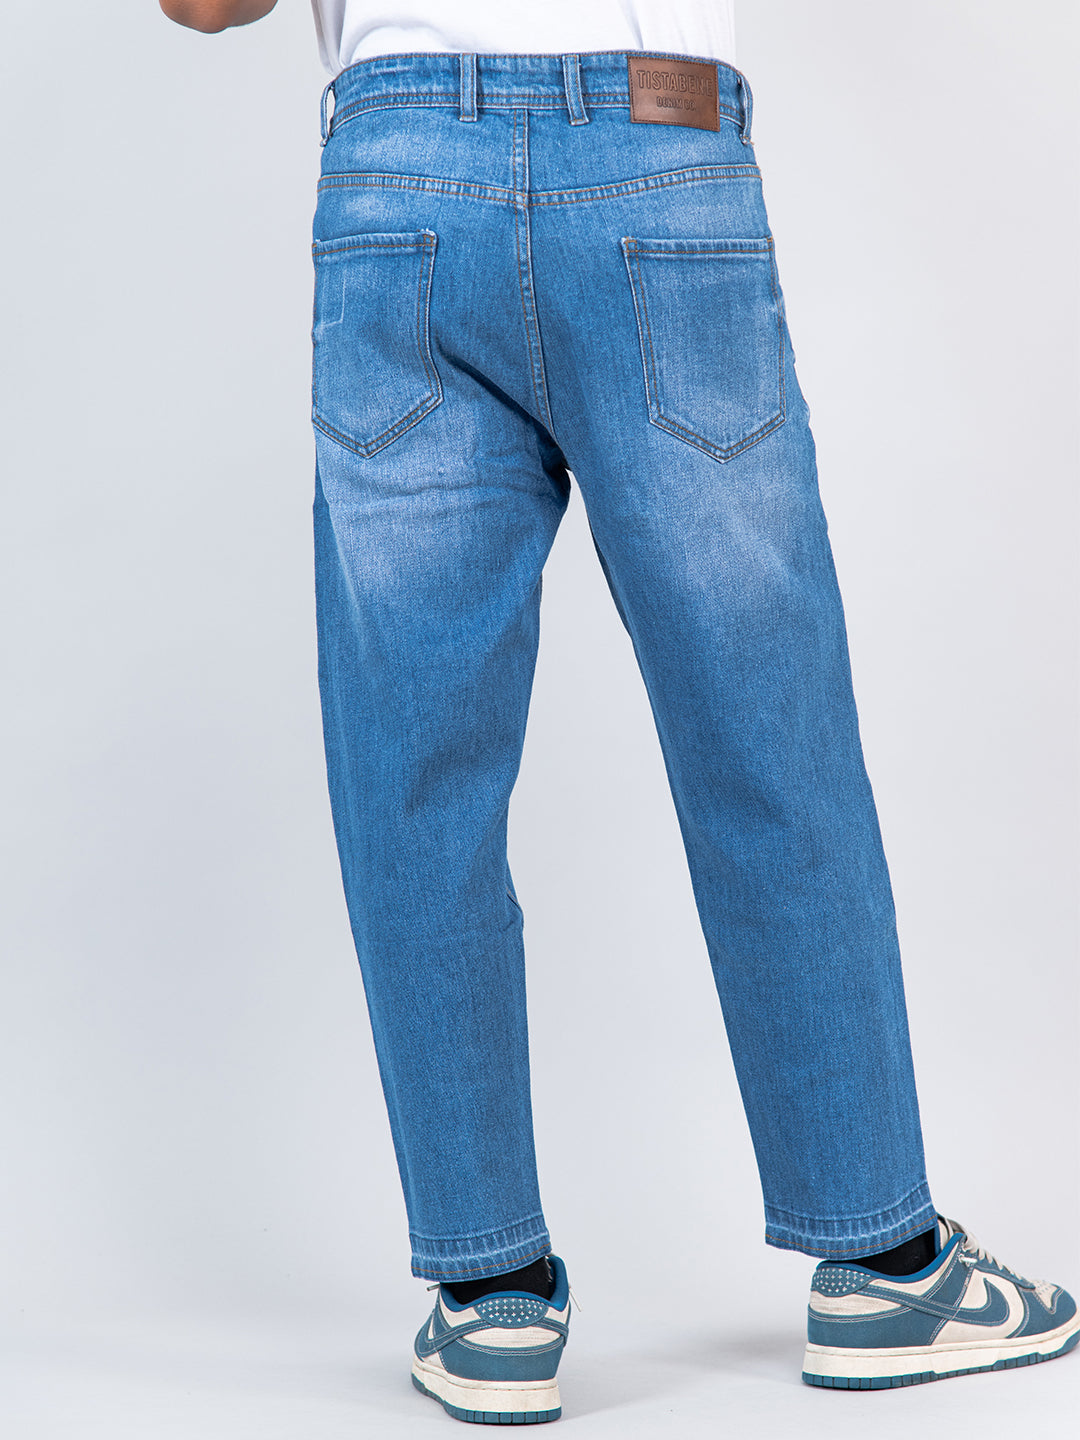 Buy Scratch Jeans online Blue Damage Jeans wholesale rs. in india.